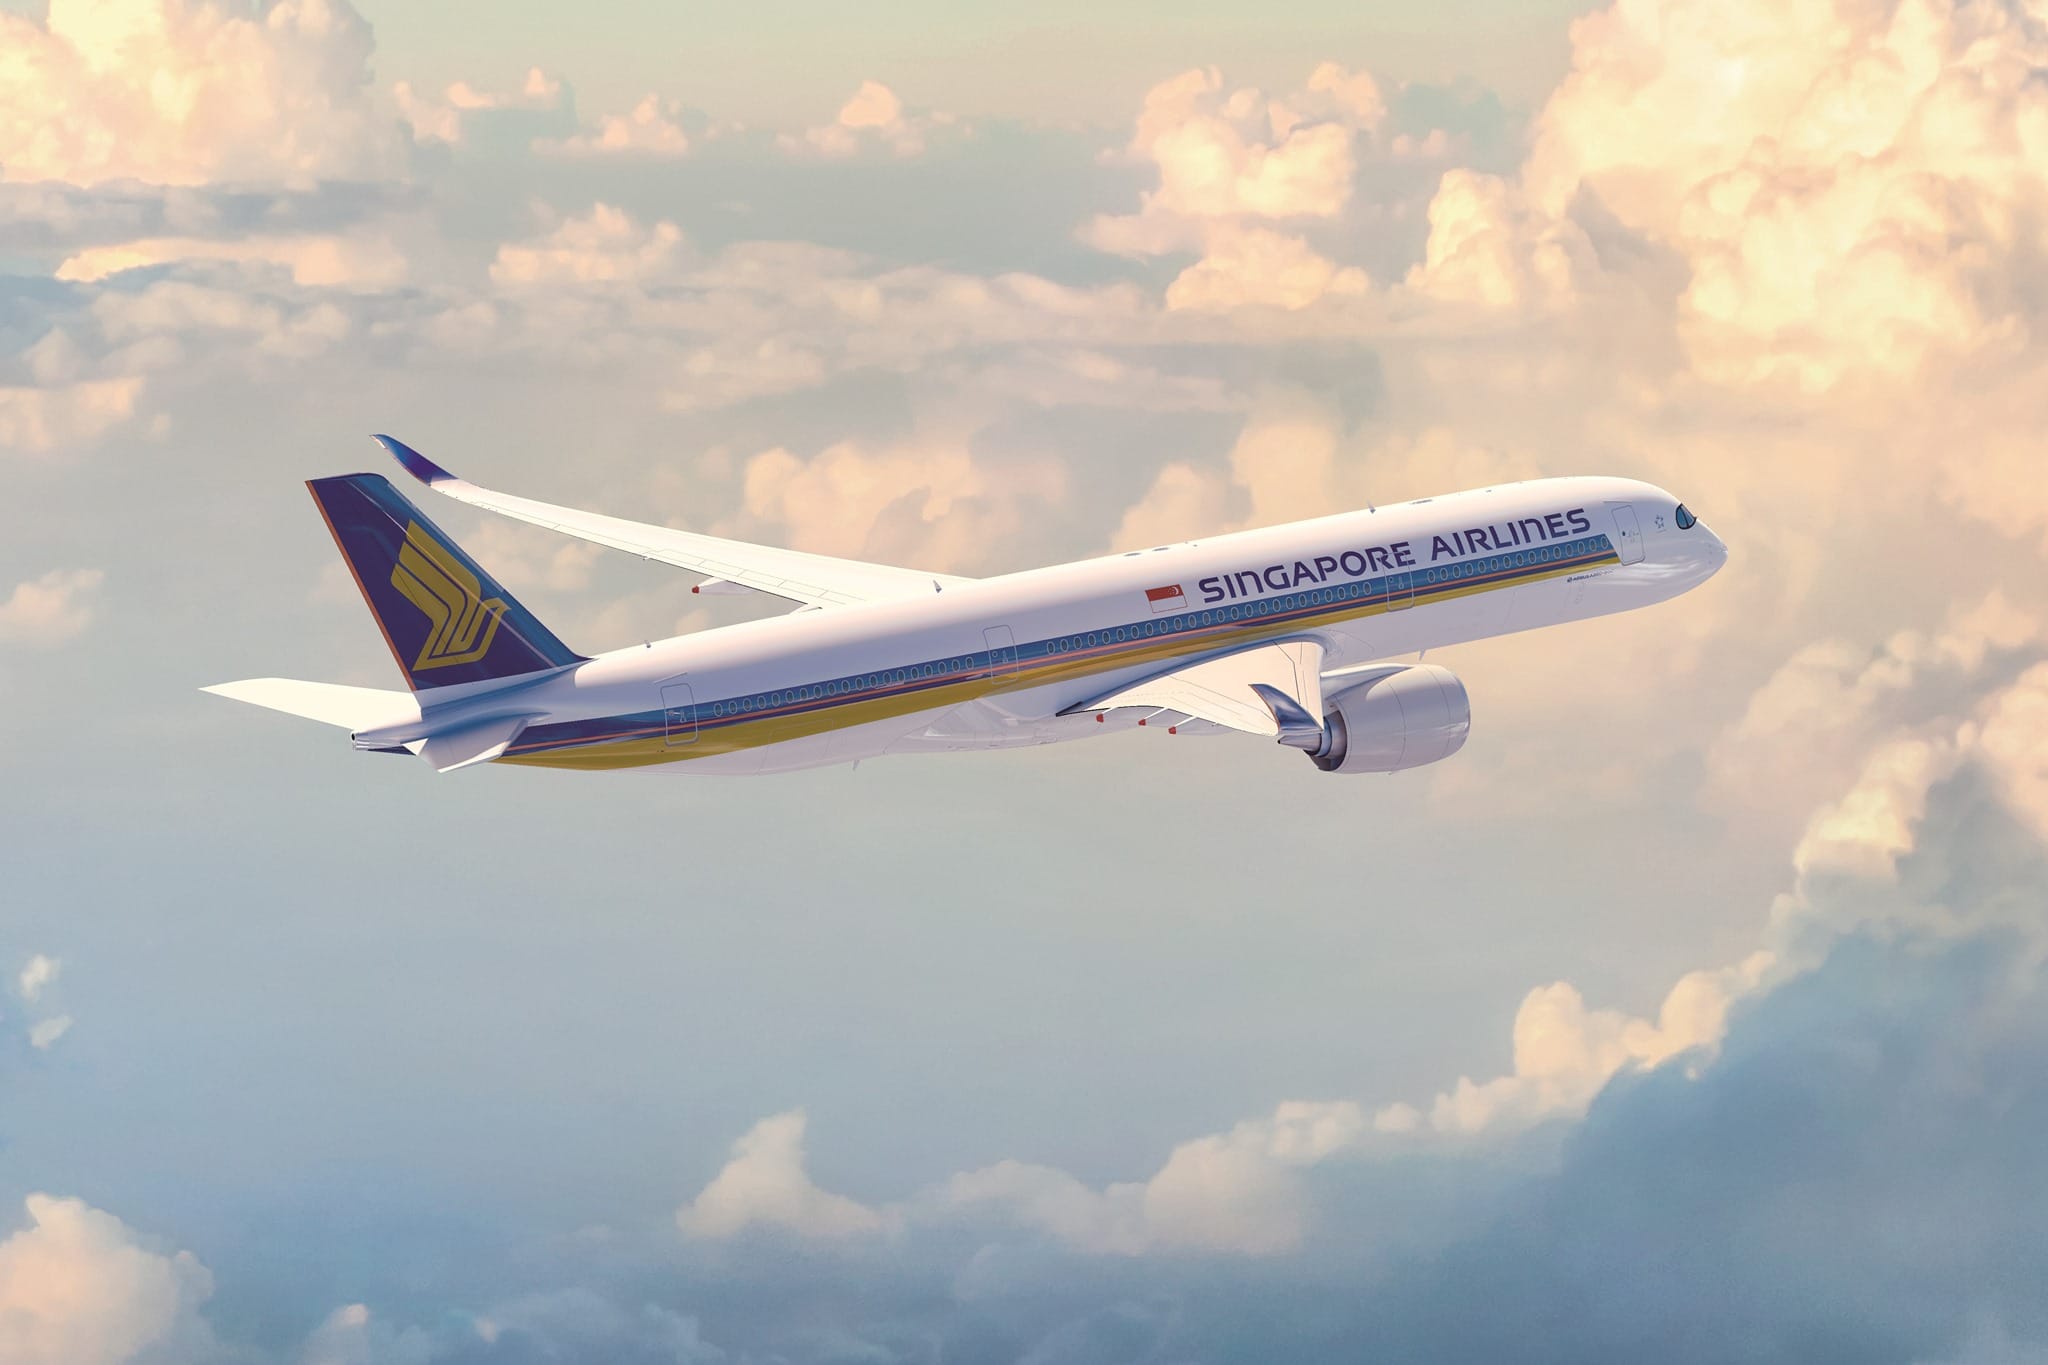 Source: Singapore Airlines | Facebook